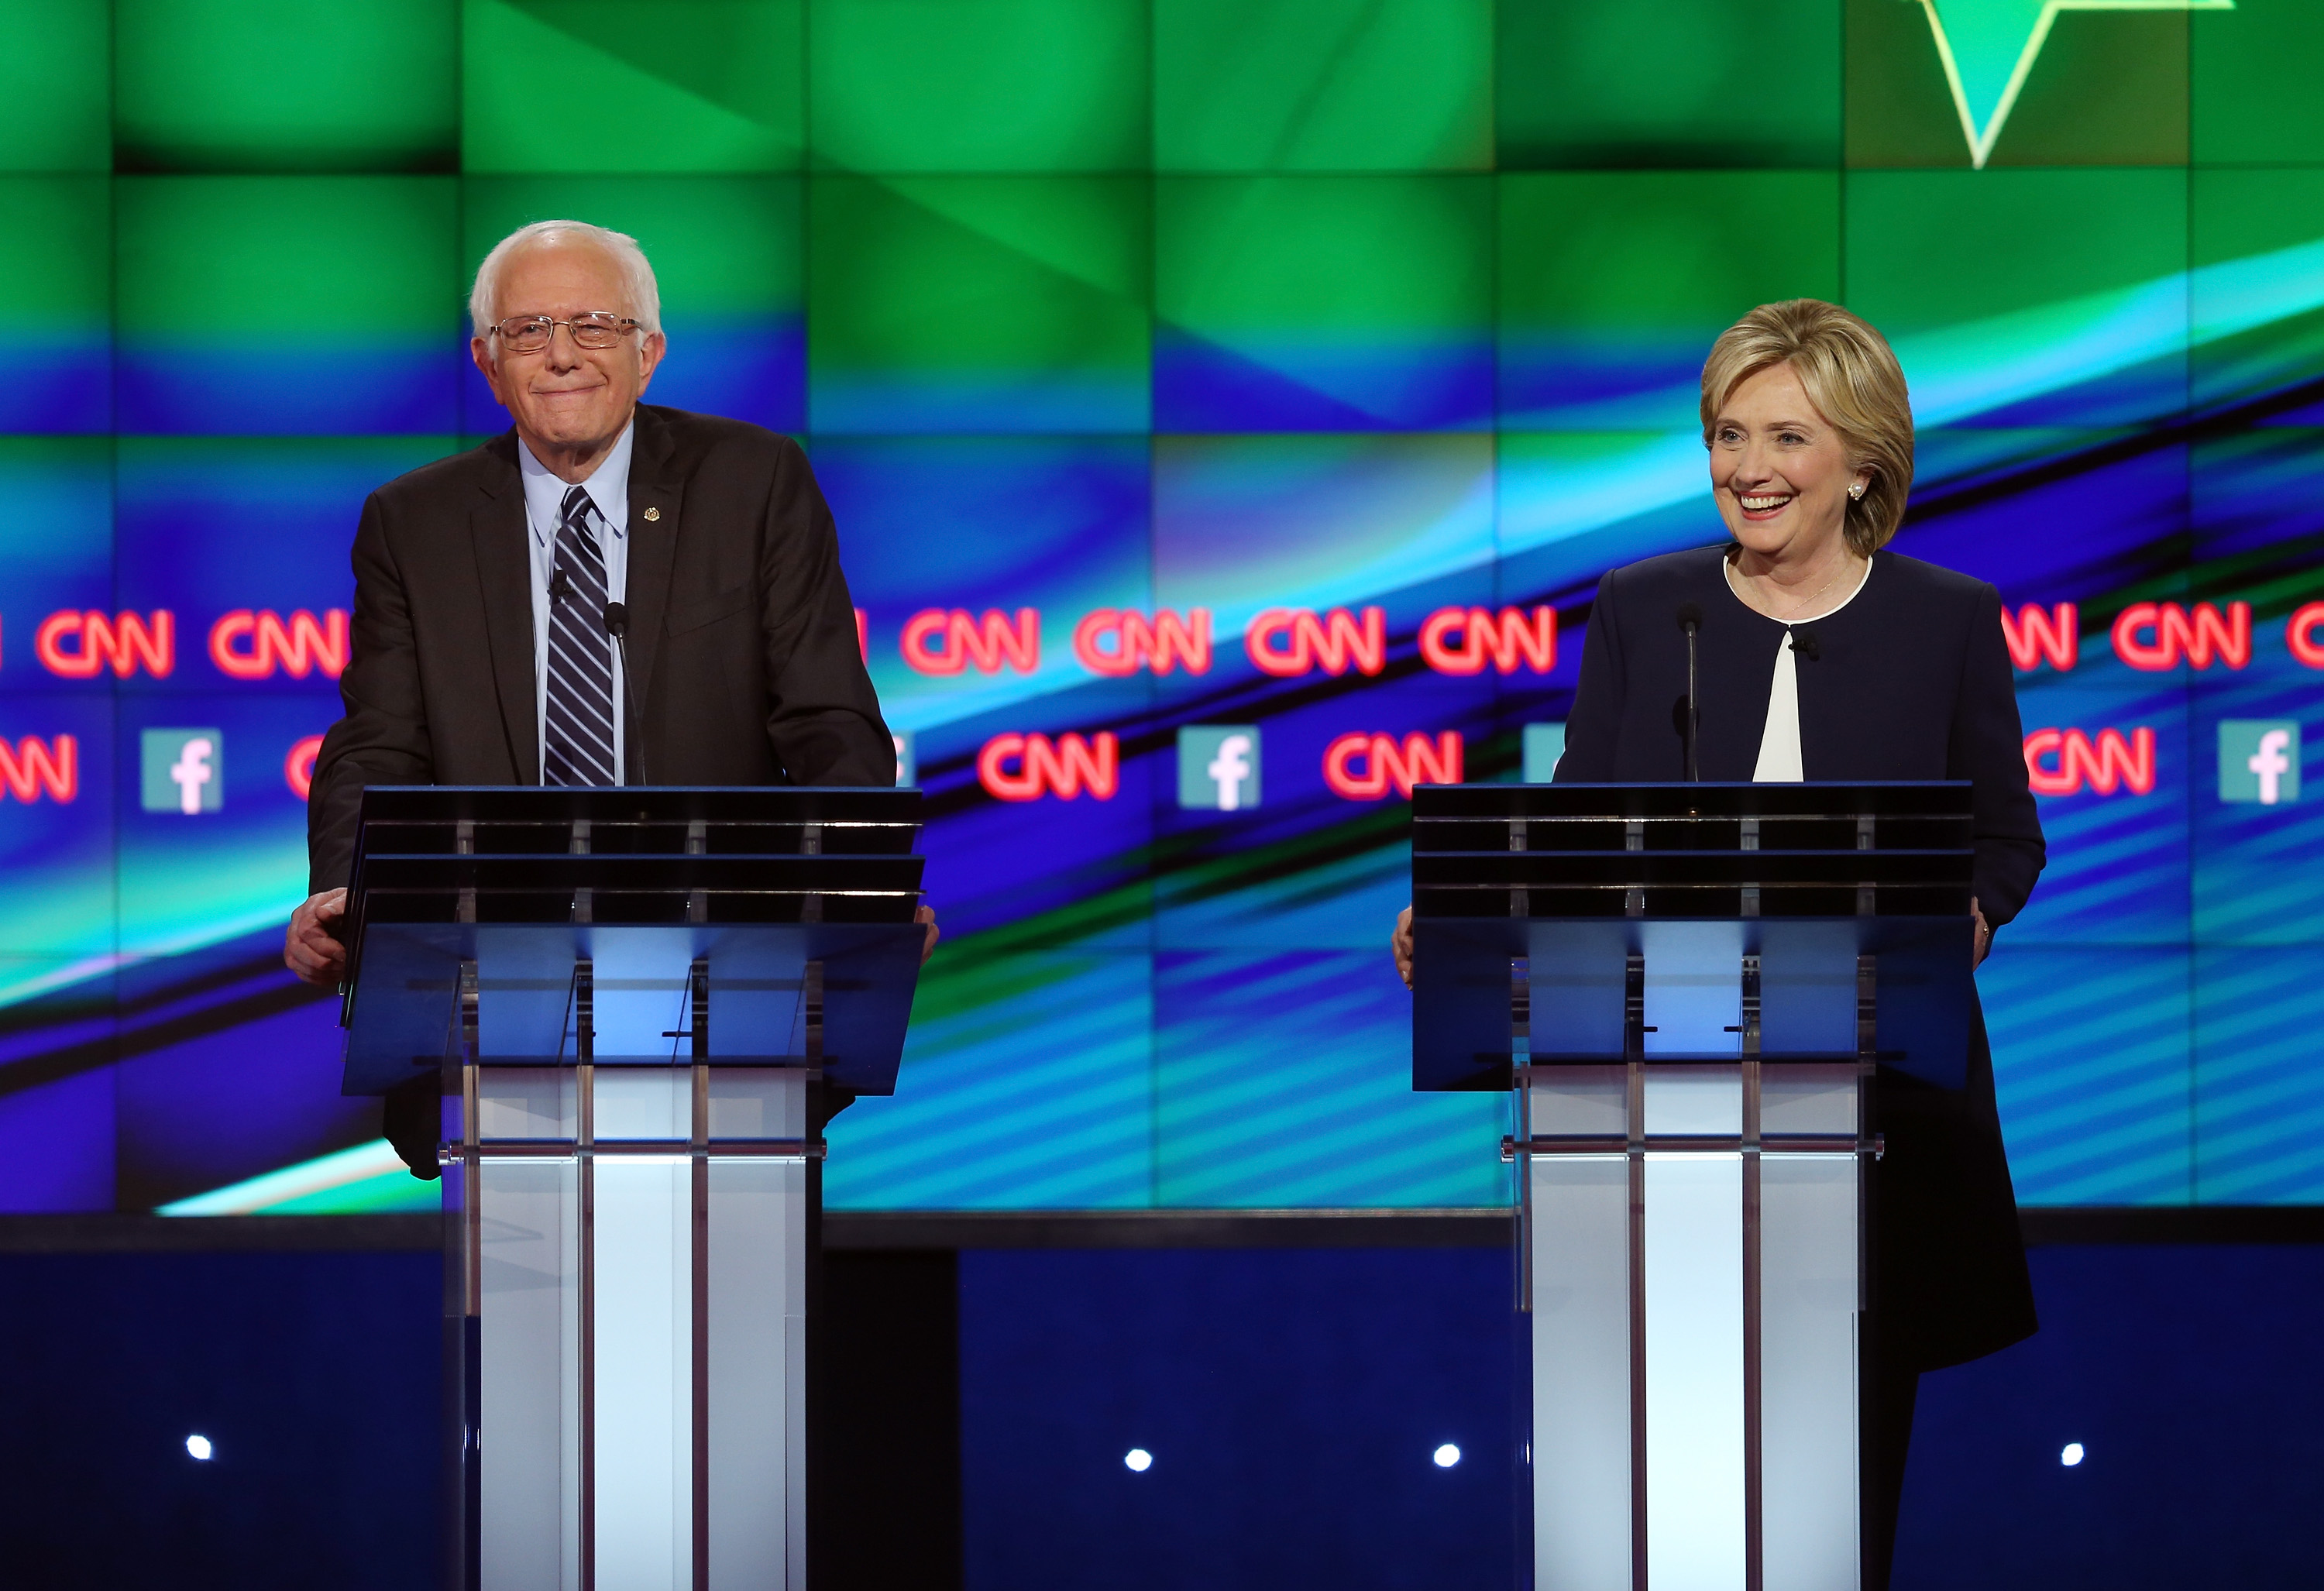 Democratic presidential candidates Sen. Bernie Sanders and Hillary Clinton take part in a presidential debate. (Photo by Joe Raedle/Getty Images)